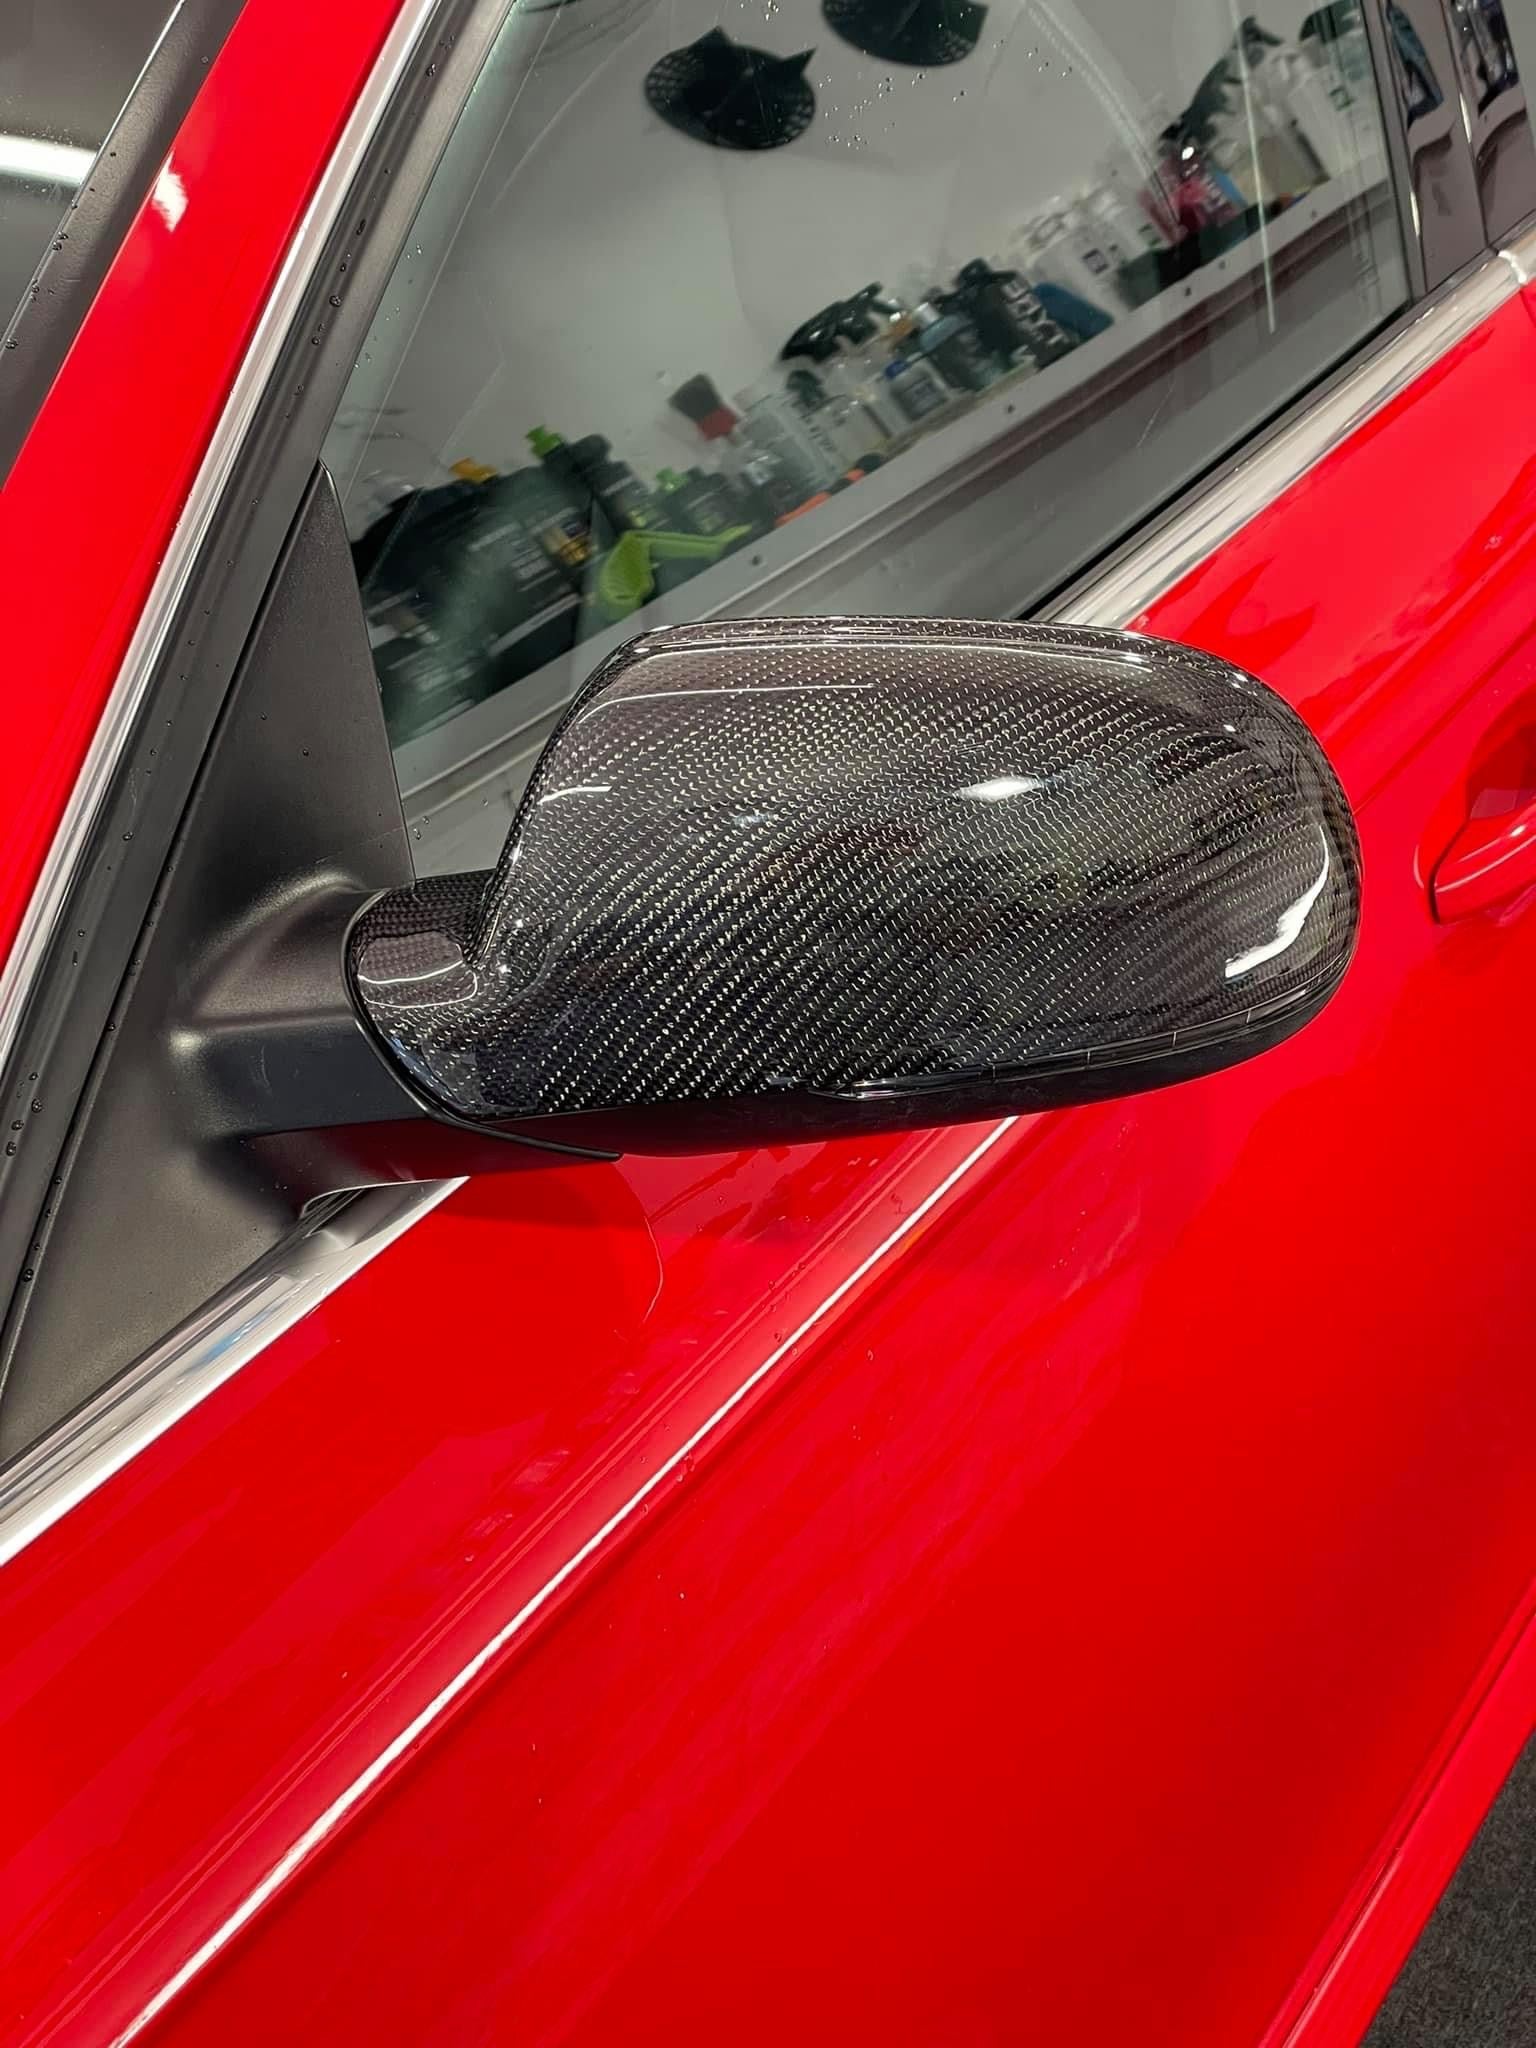 Audi A5/S5 and RS5 Replacement Carbon Fibre Mirror Covers - For the B8.5 Facelift Audi A5 Models. This product is manufactured from 2*2 Carbon Fibre Weave with an ABS Plastic base to ensure this products fitment is perfect for your model. This is a must for anyone looking to add a touch of unique carbon to their A5/S5 or RS5 Audi. 